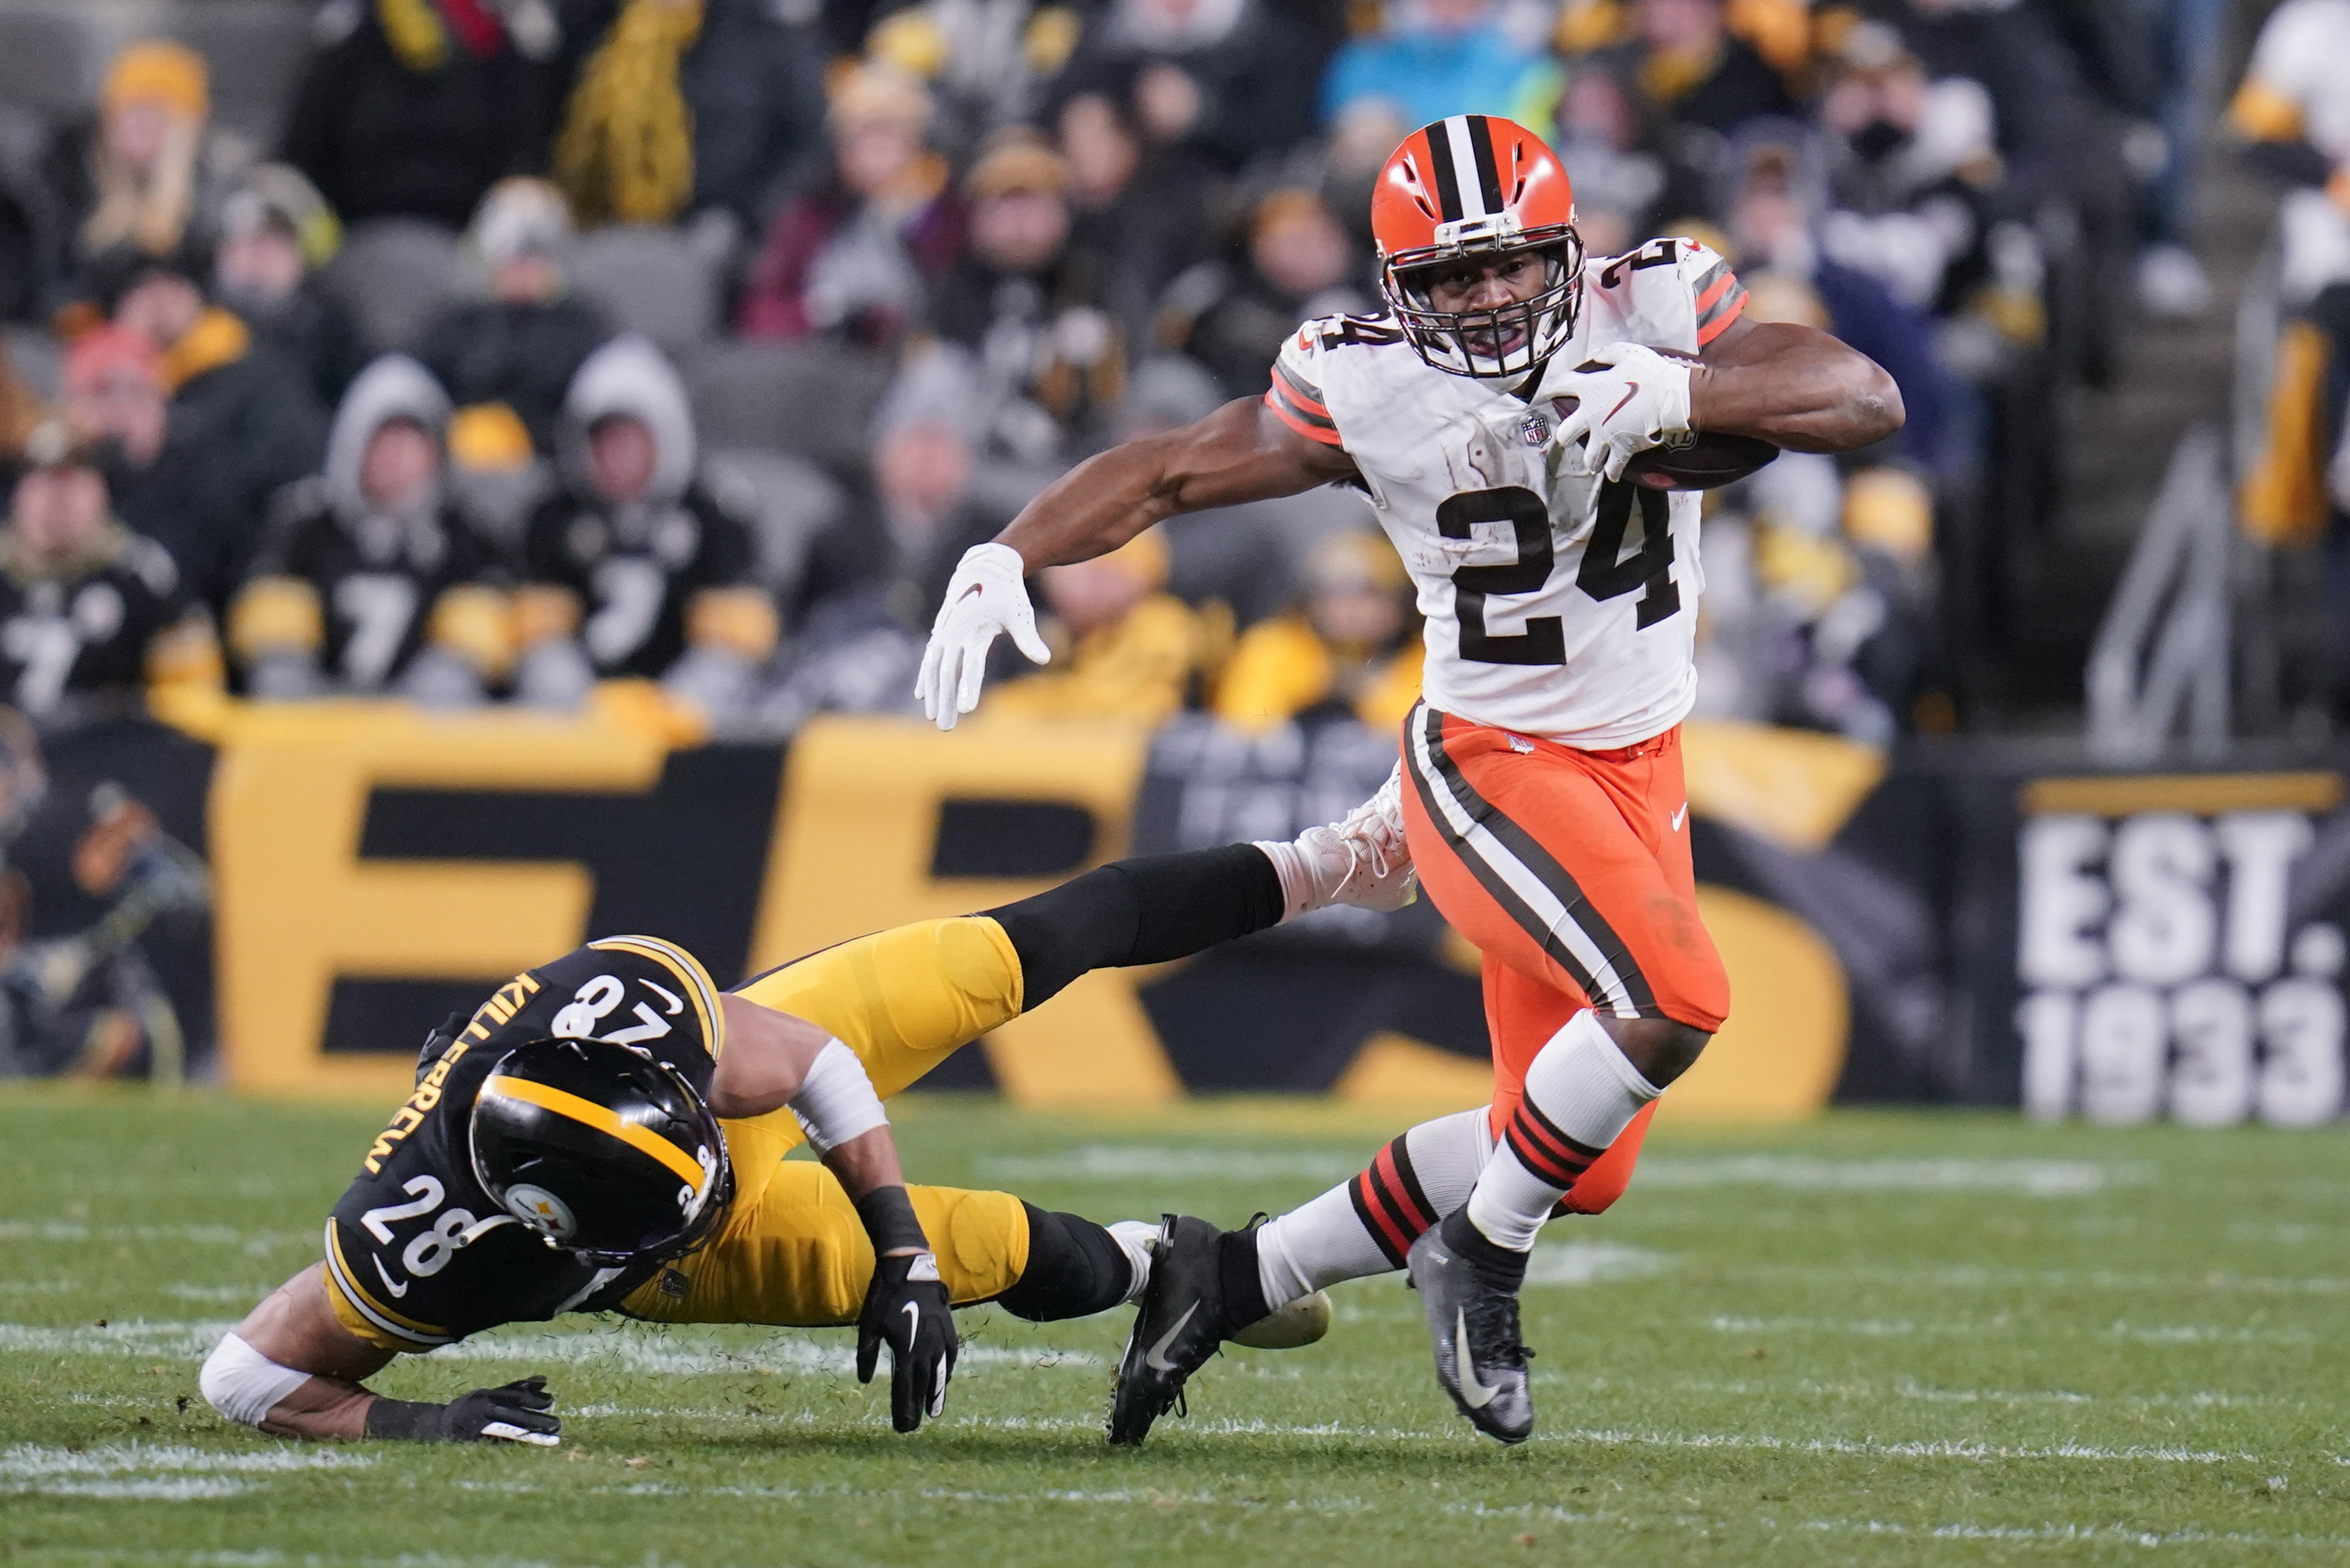 Watch Cleveland Browns RB Nick Chubbs Batman-themed hype video for upcoming NFL season